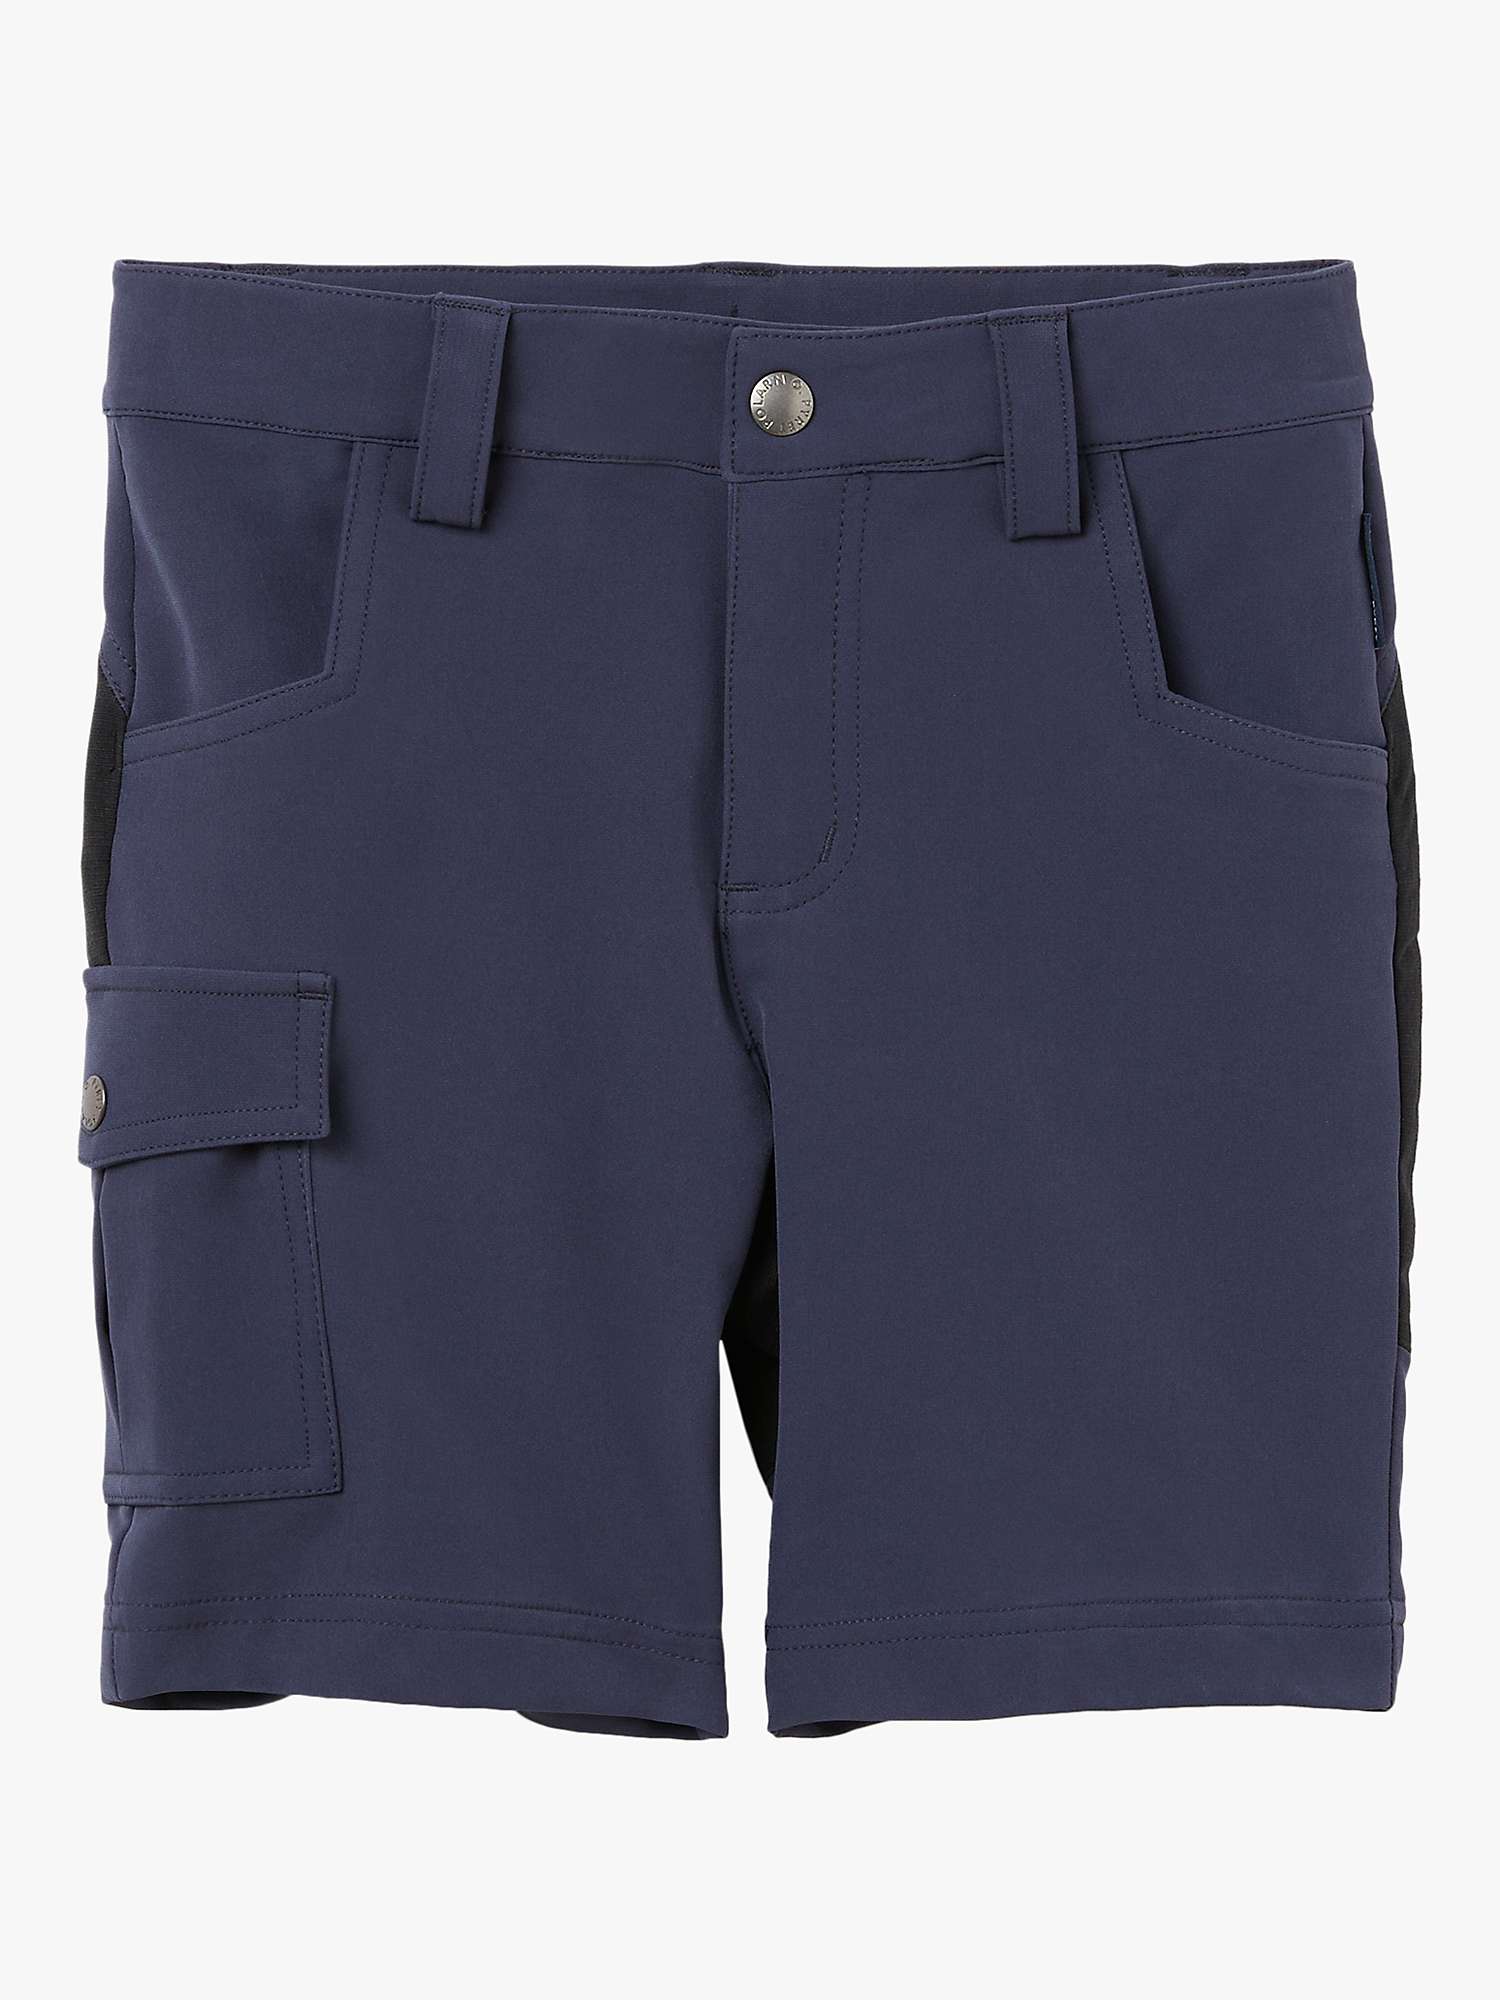 Buy Polarn O. Pyret Kids' Recycled Outerwear Shorts, Blue Online at johnlewis.com